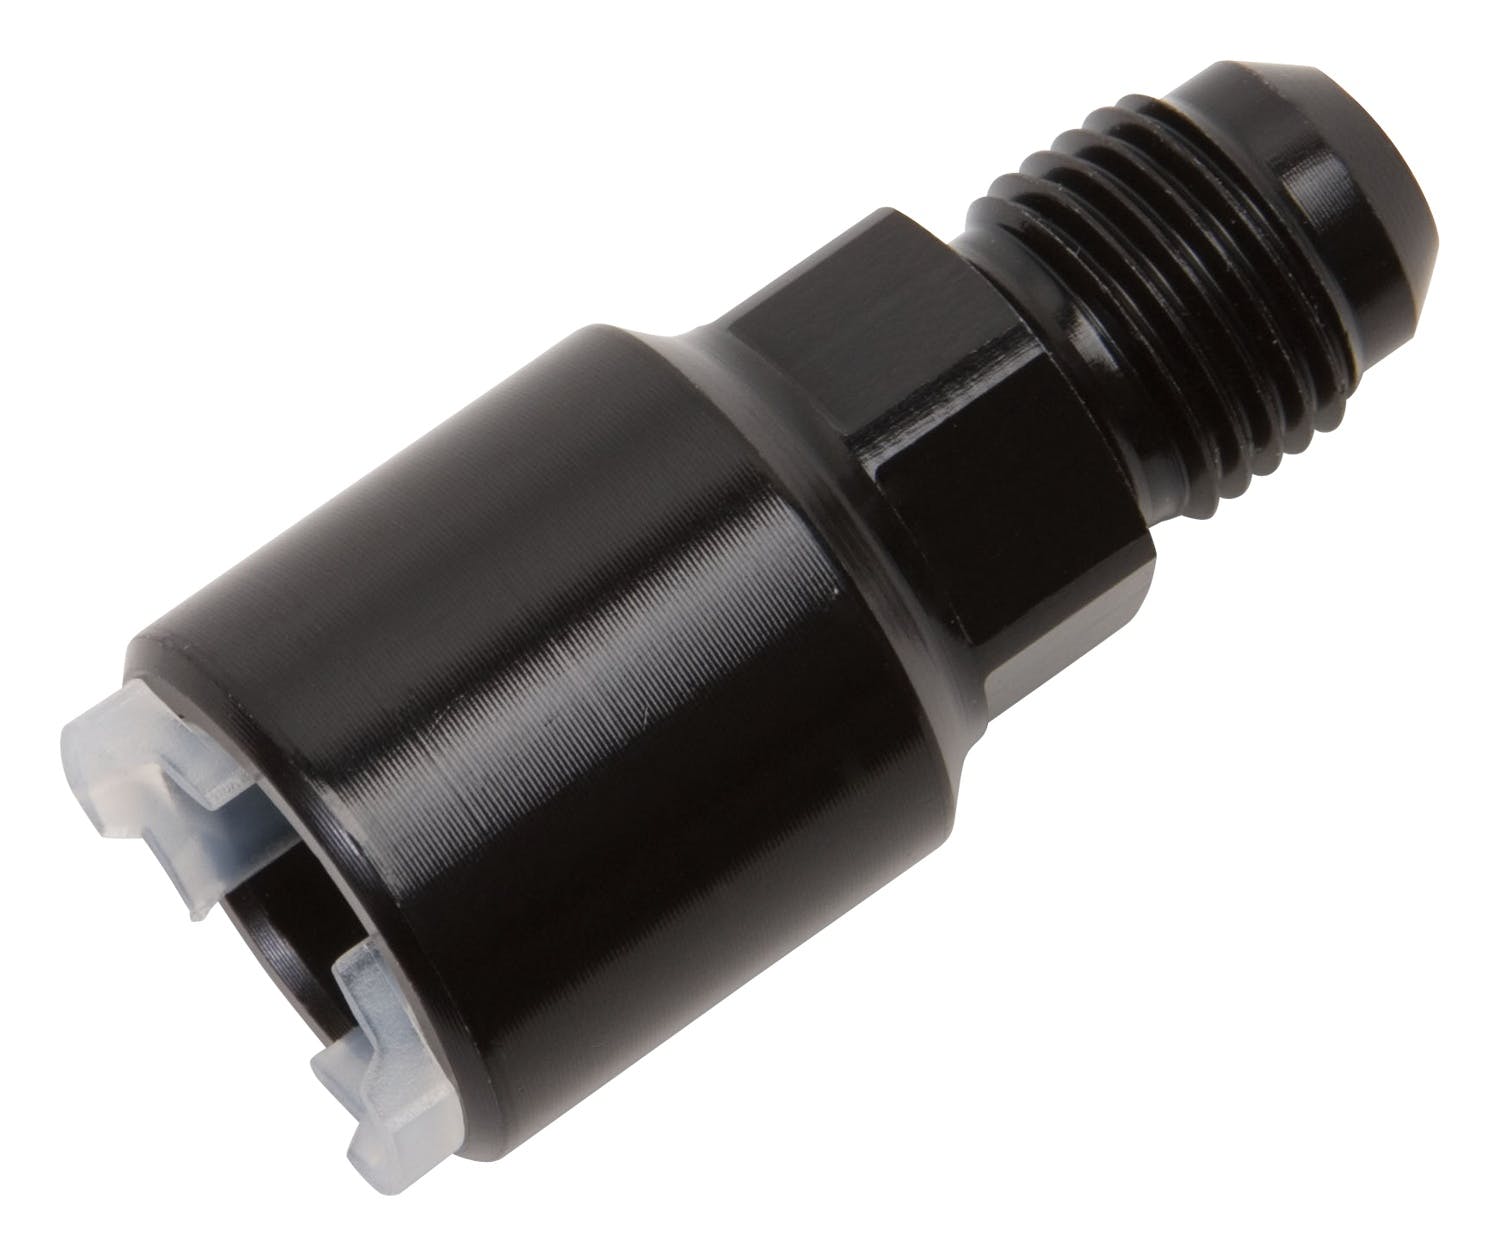 Russell 640863 Adapter 5/16 inch Fuel Injection Fitting, LT1, LT4, and LS1 Pressure Side Black